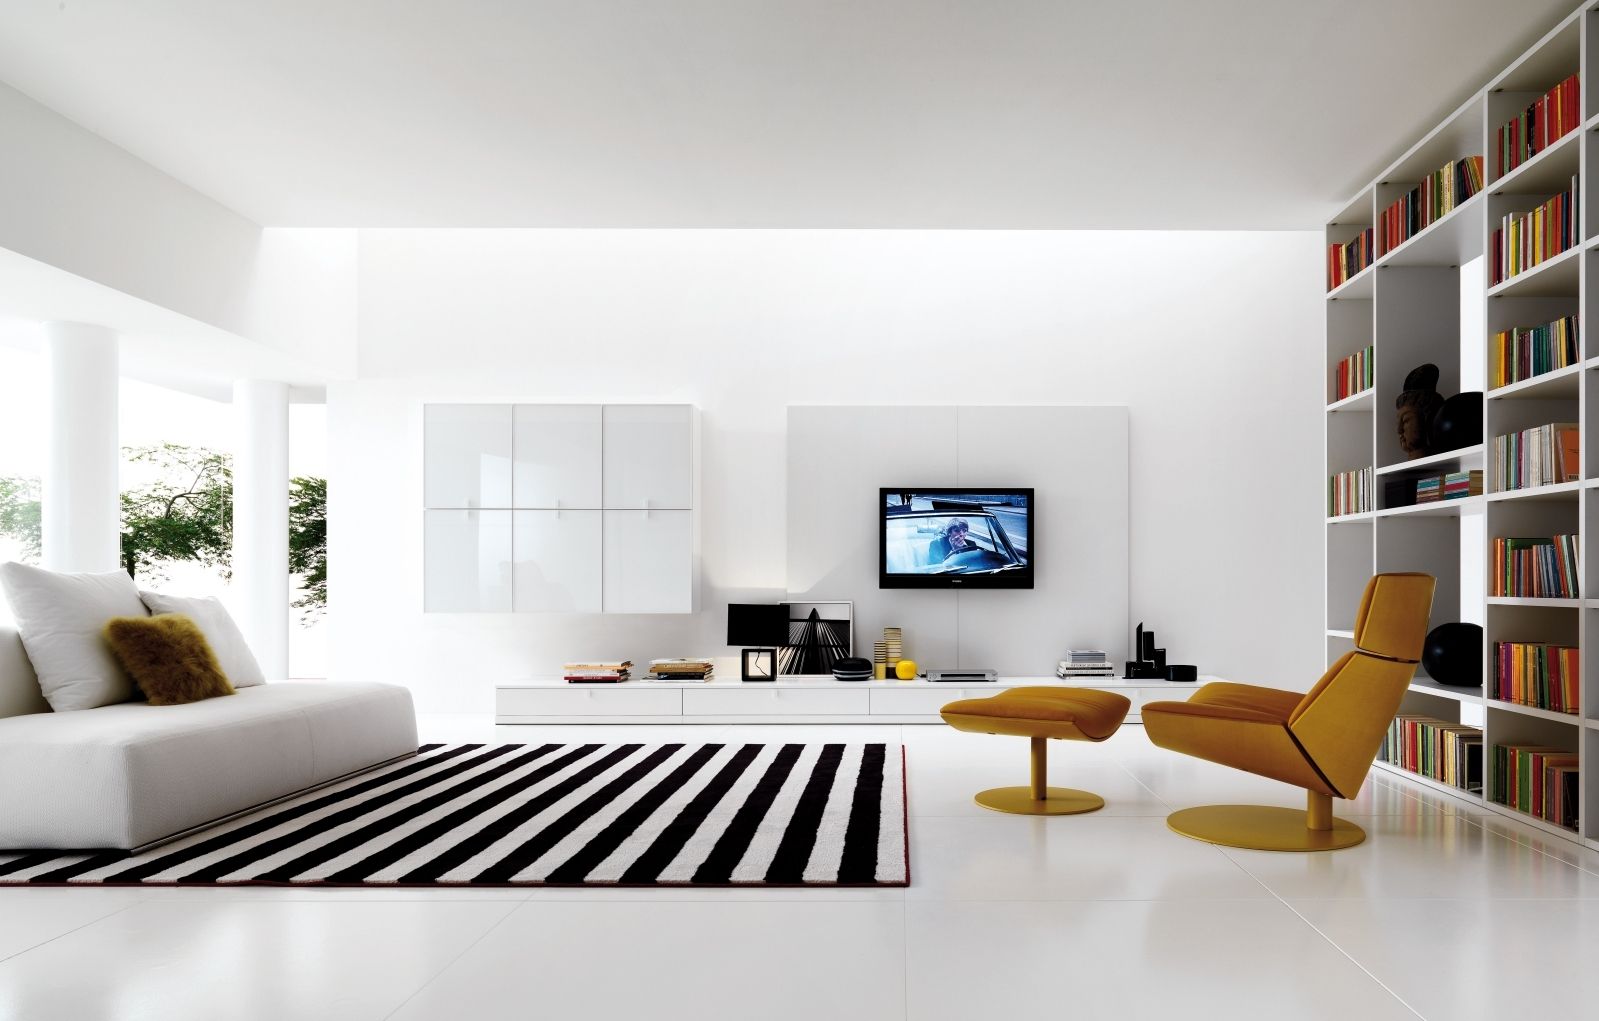 Noticeable Yellow Eames Chair In Black And White Living Room With Bookshelves Divider Plus Stripped Rug (Photo 2481 of 7825)